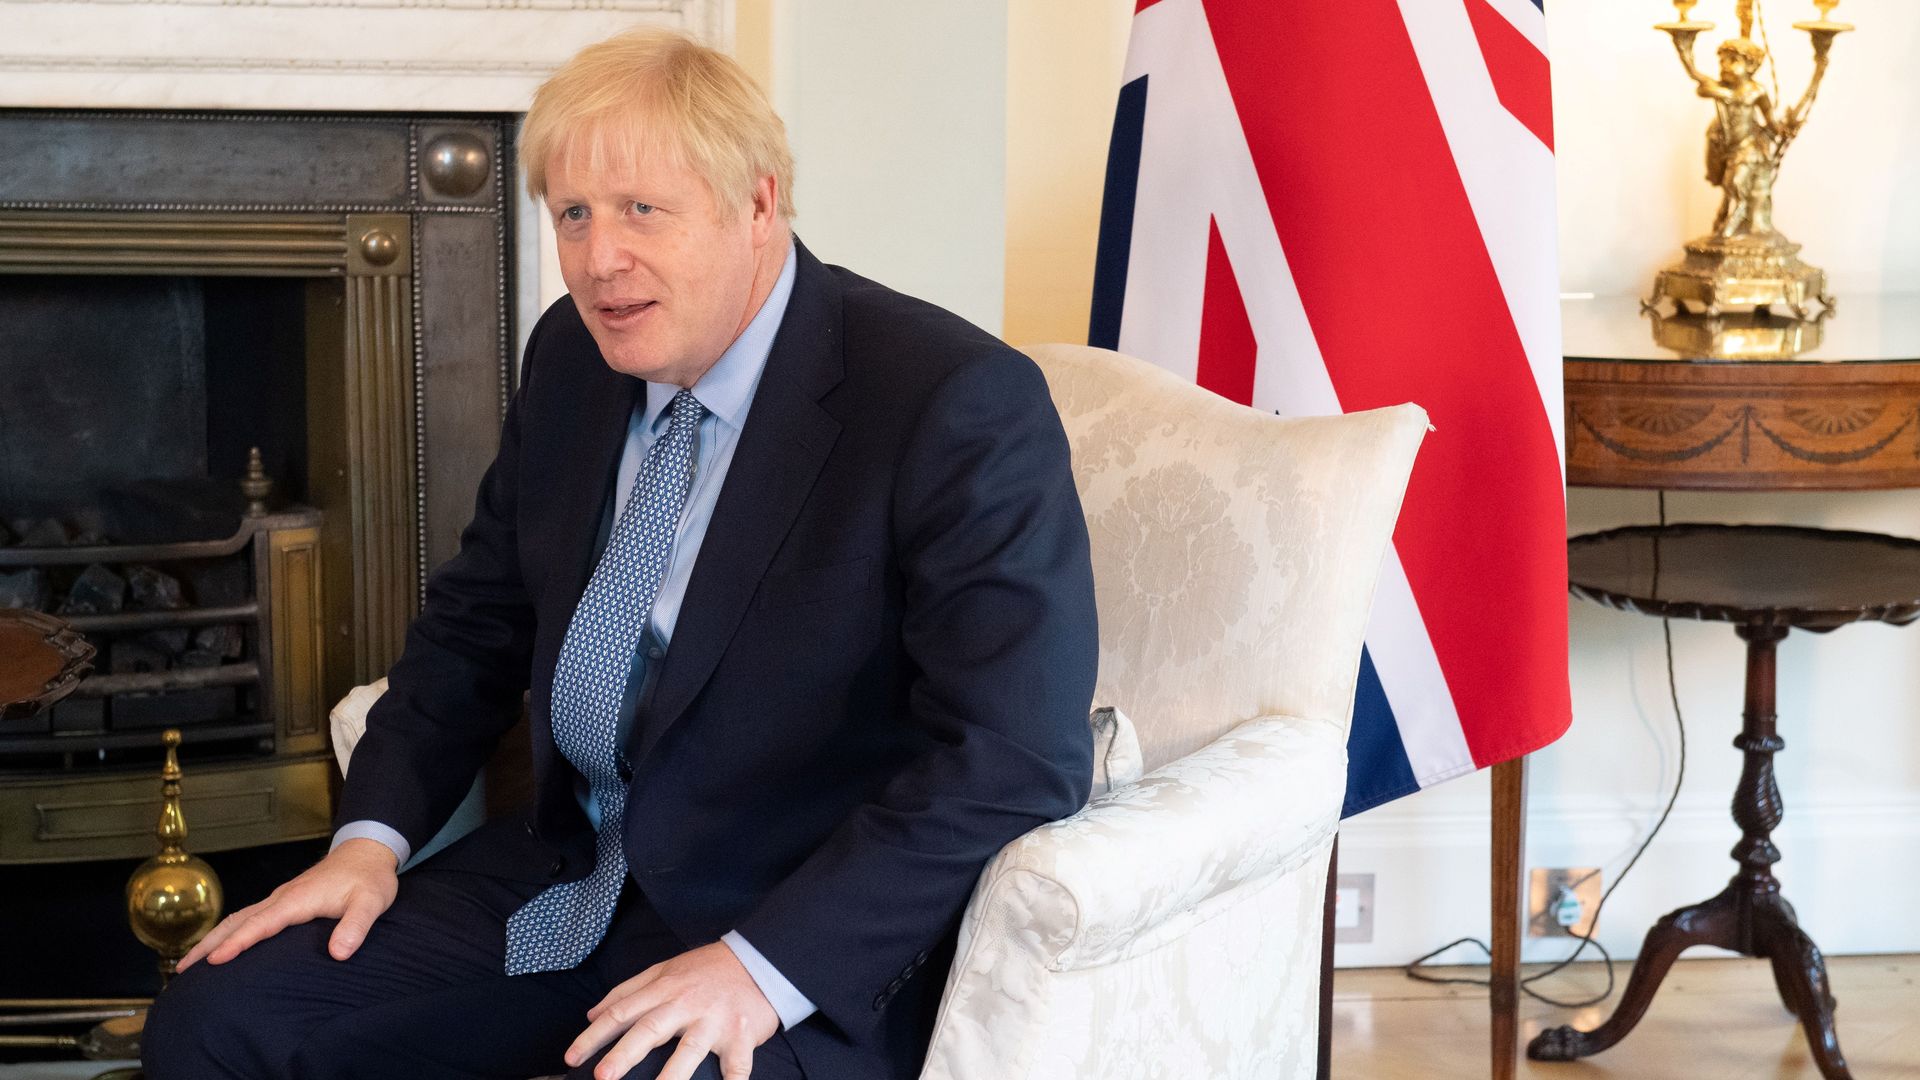 In this image, Boris Johnson sits in a chair with the British flag behind him.